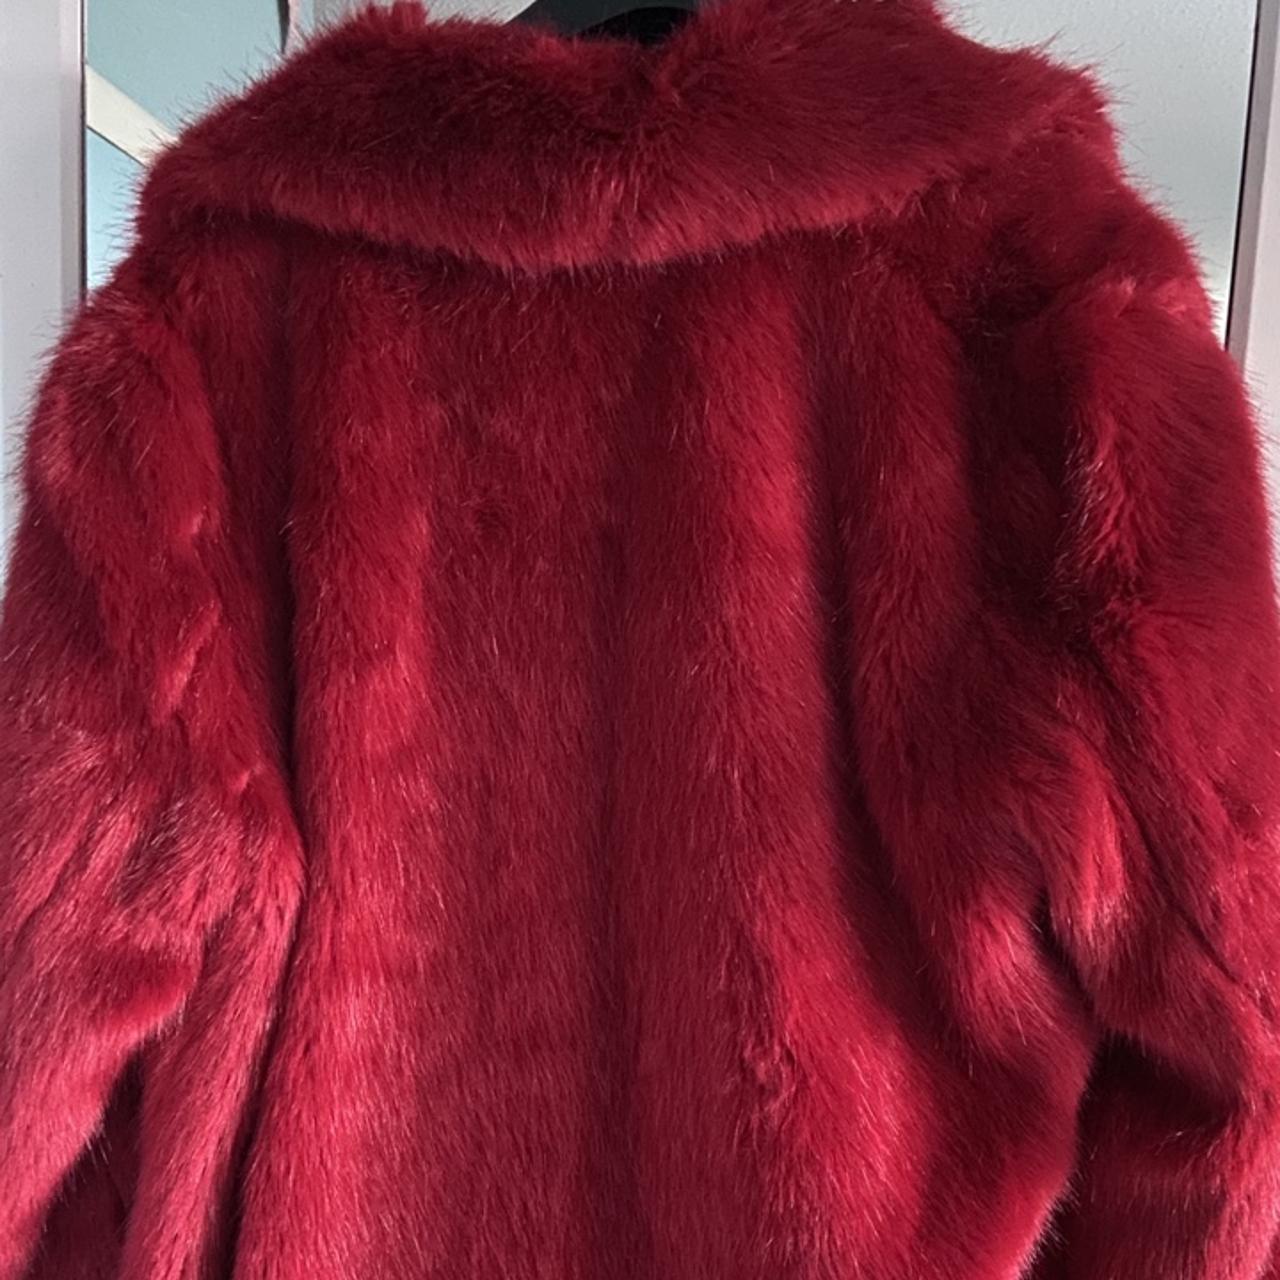 Stunning bright red faux fur coat! I seem to have... - Depop